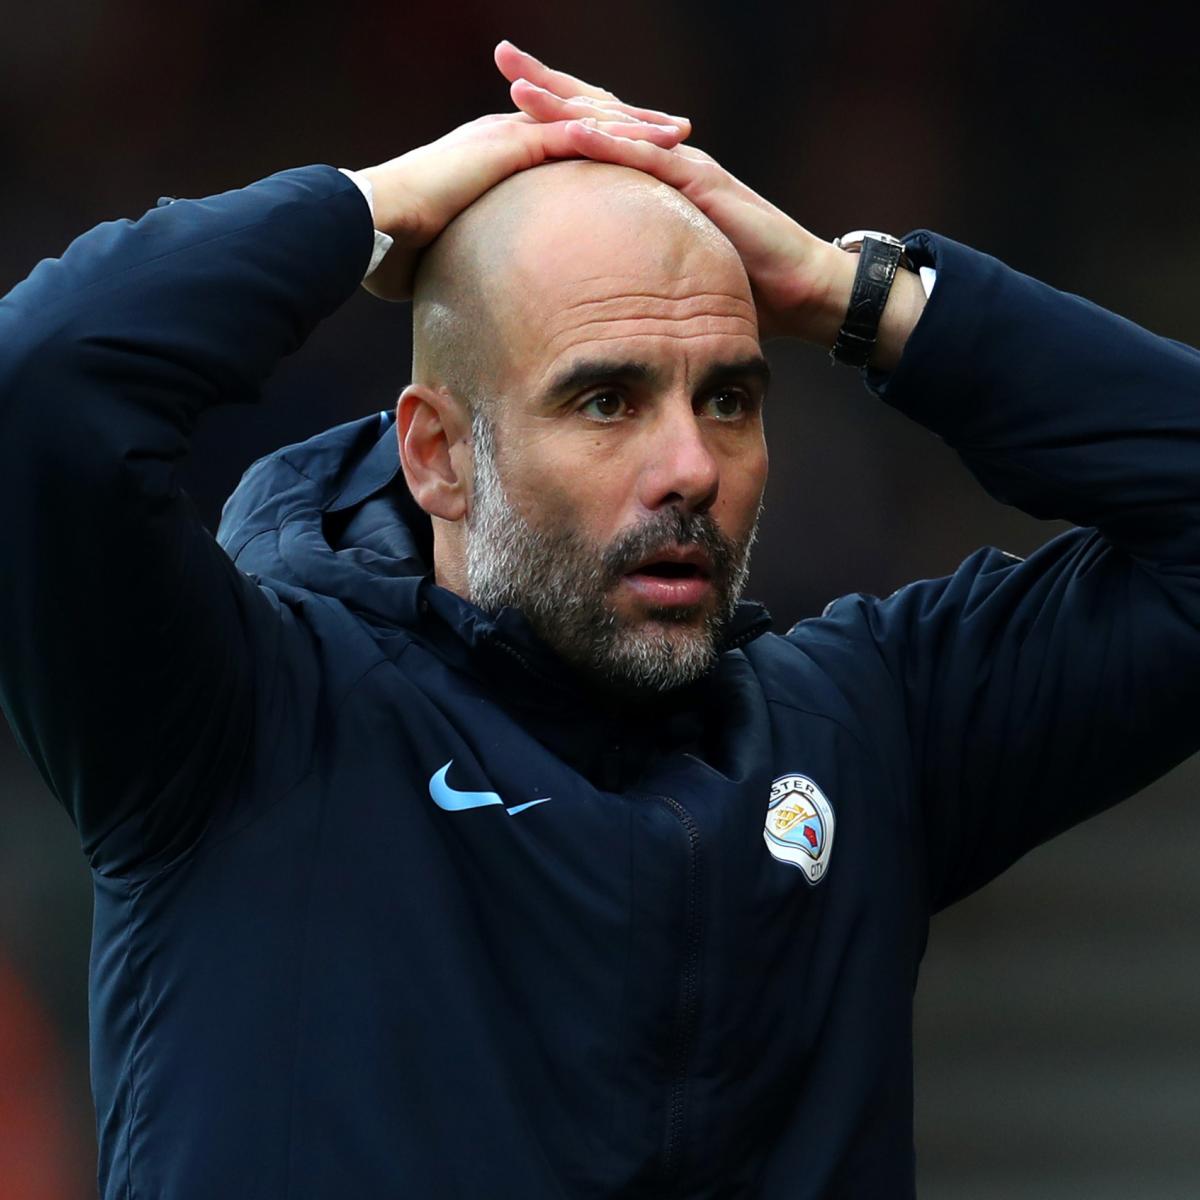 Image result for manchester city violate ffp 2019 getty